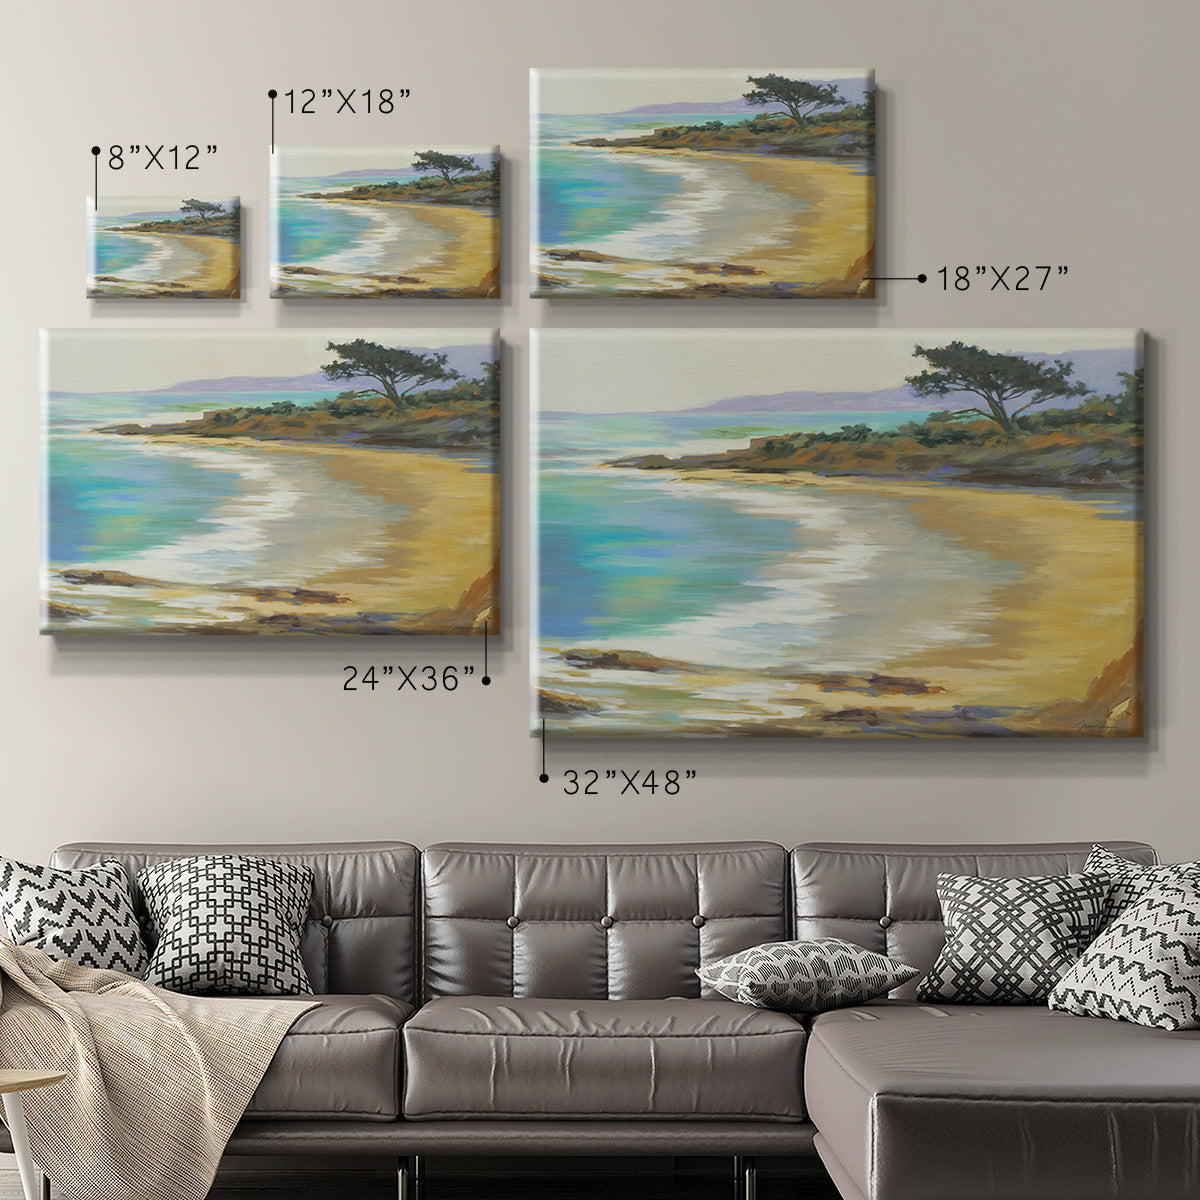 Rocky Point Premium Gallery Wrapped Canvas - Ready to Hang